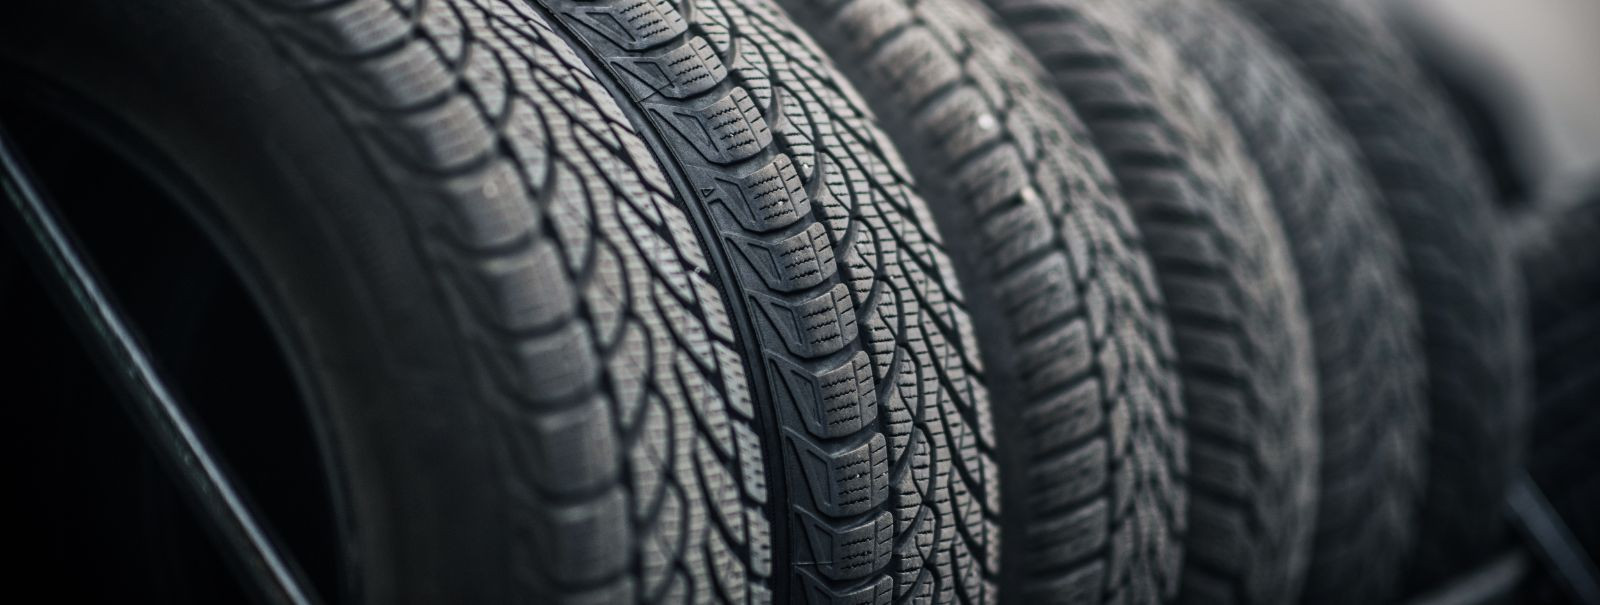 Tyres are the only point of contact between your vehicle and the road. They are critical for traction, handling, and safety, making them one of the most importa